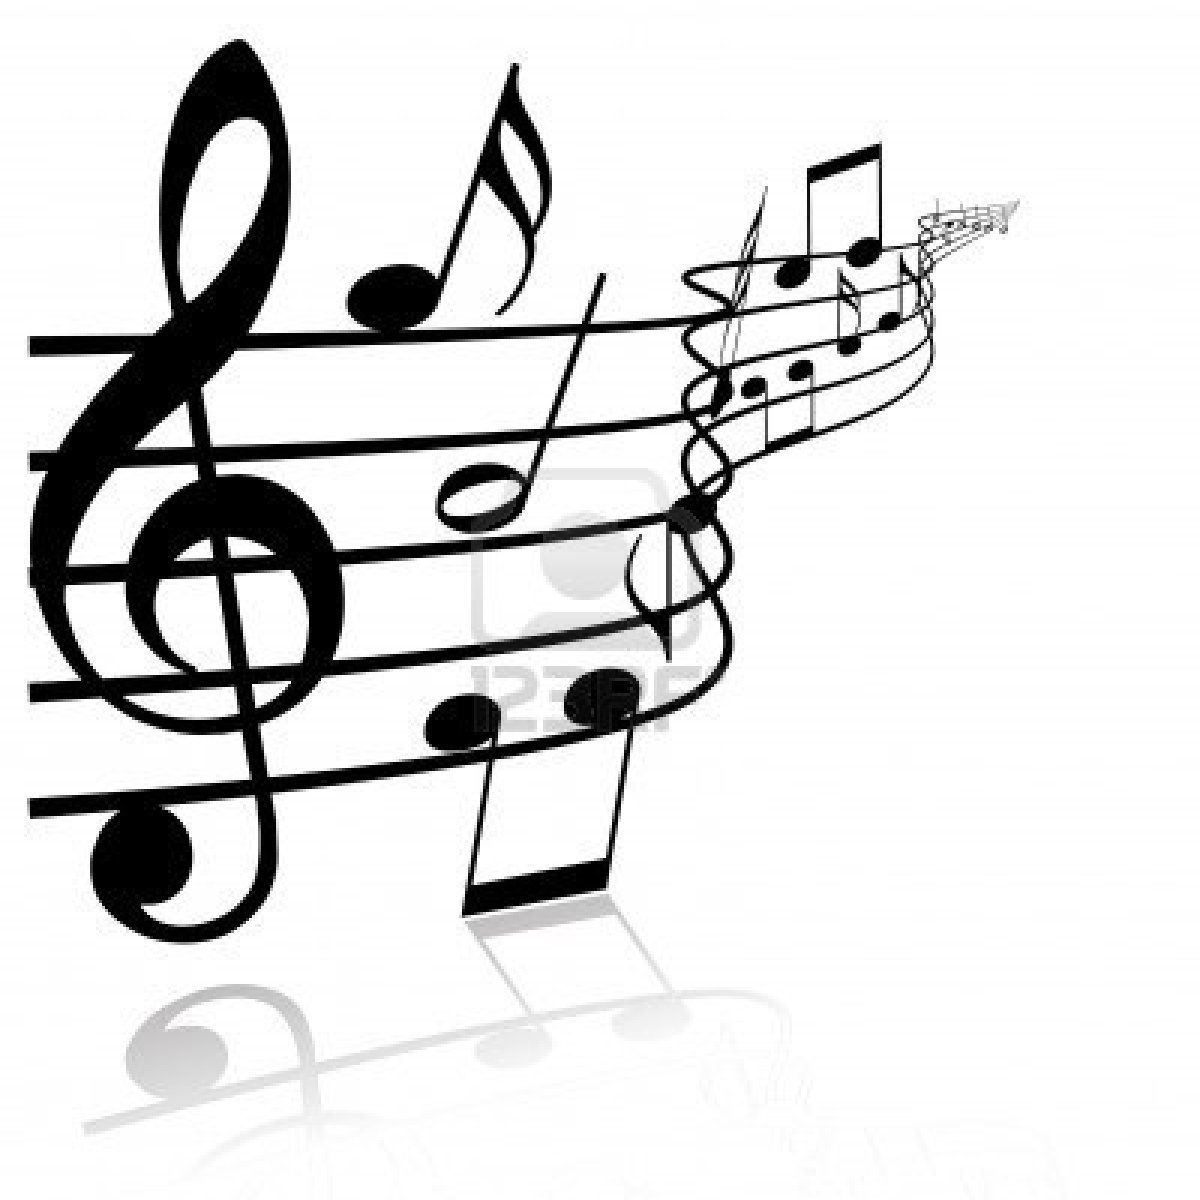 Musical Notes Background Black And White | Clipart Panda - Free ...